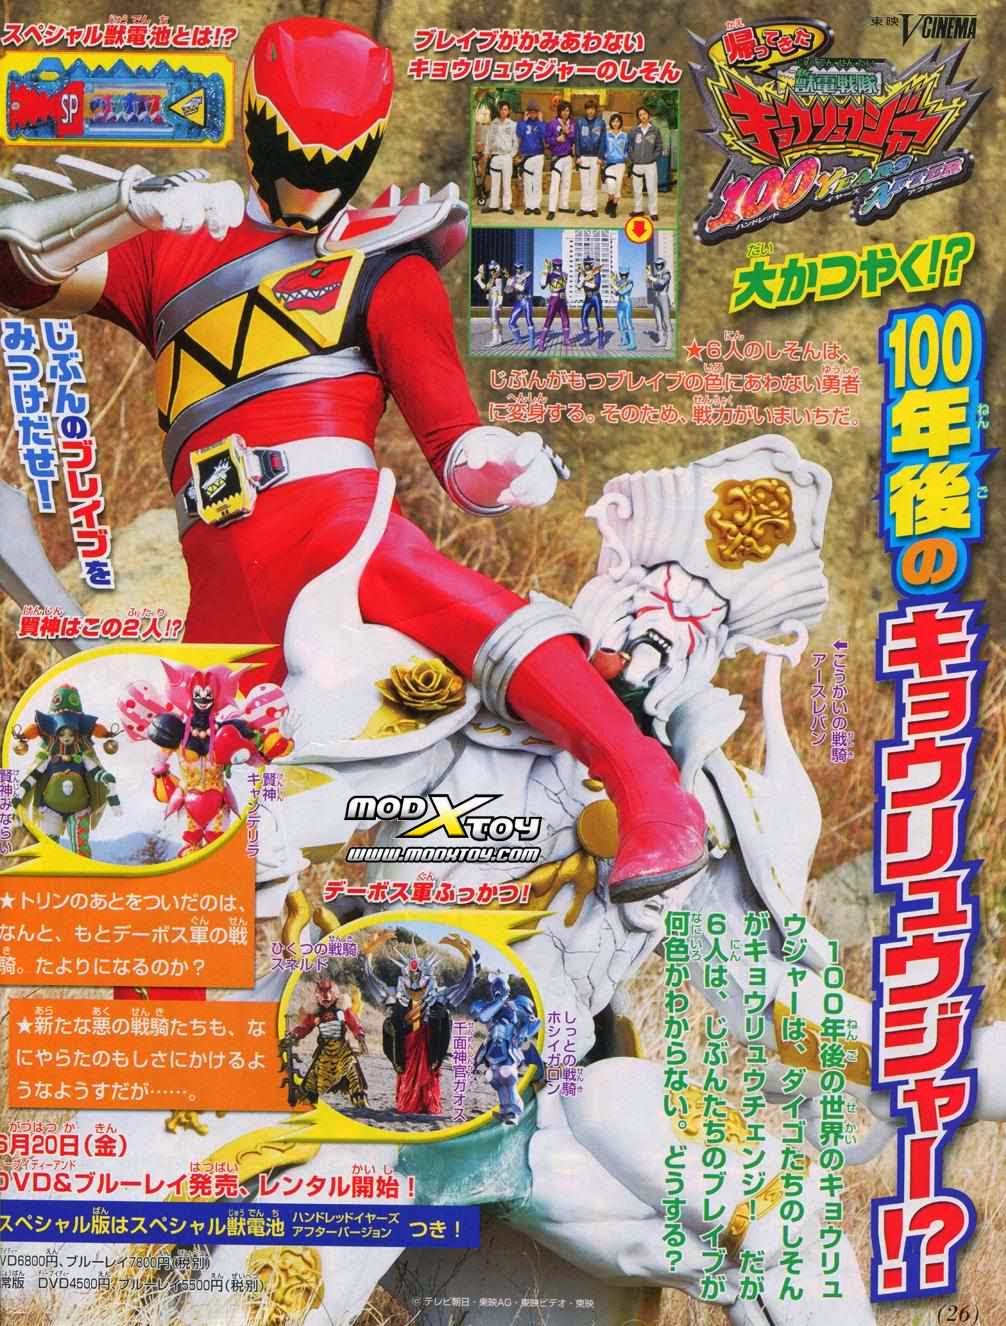 The Power Is On: Nouveau Scan Pour Kyoryuger 100 Years After